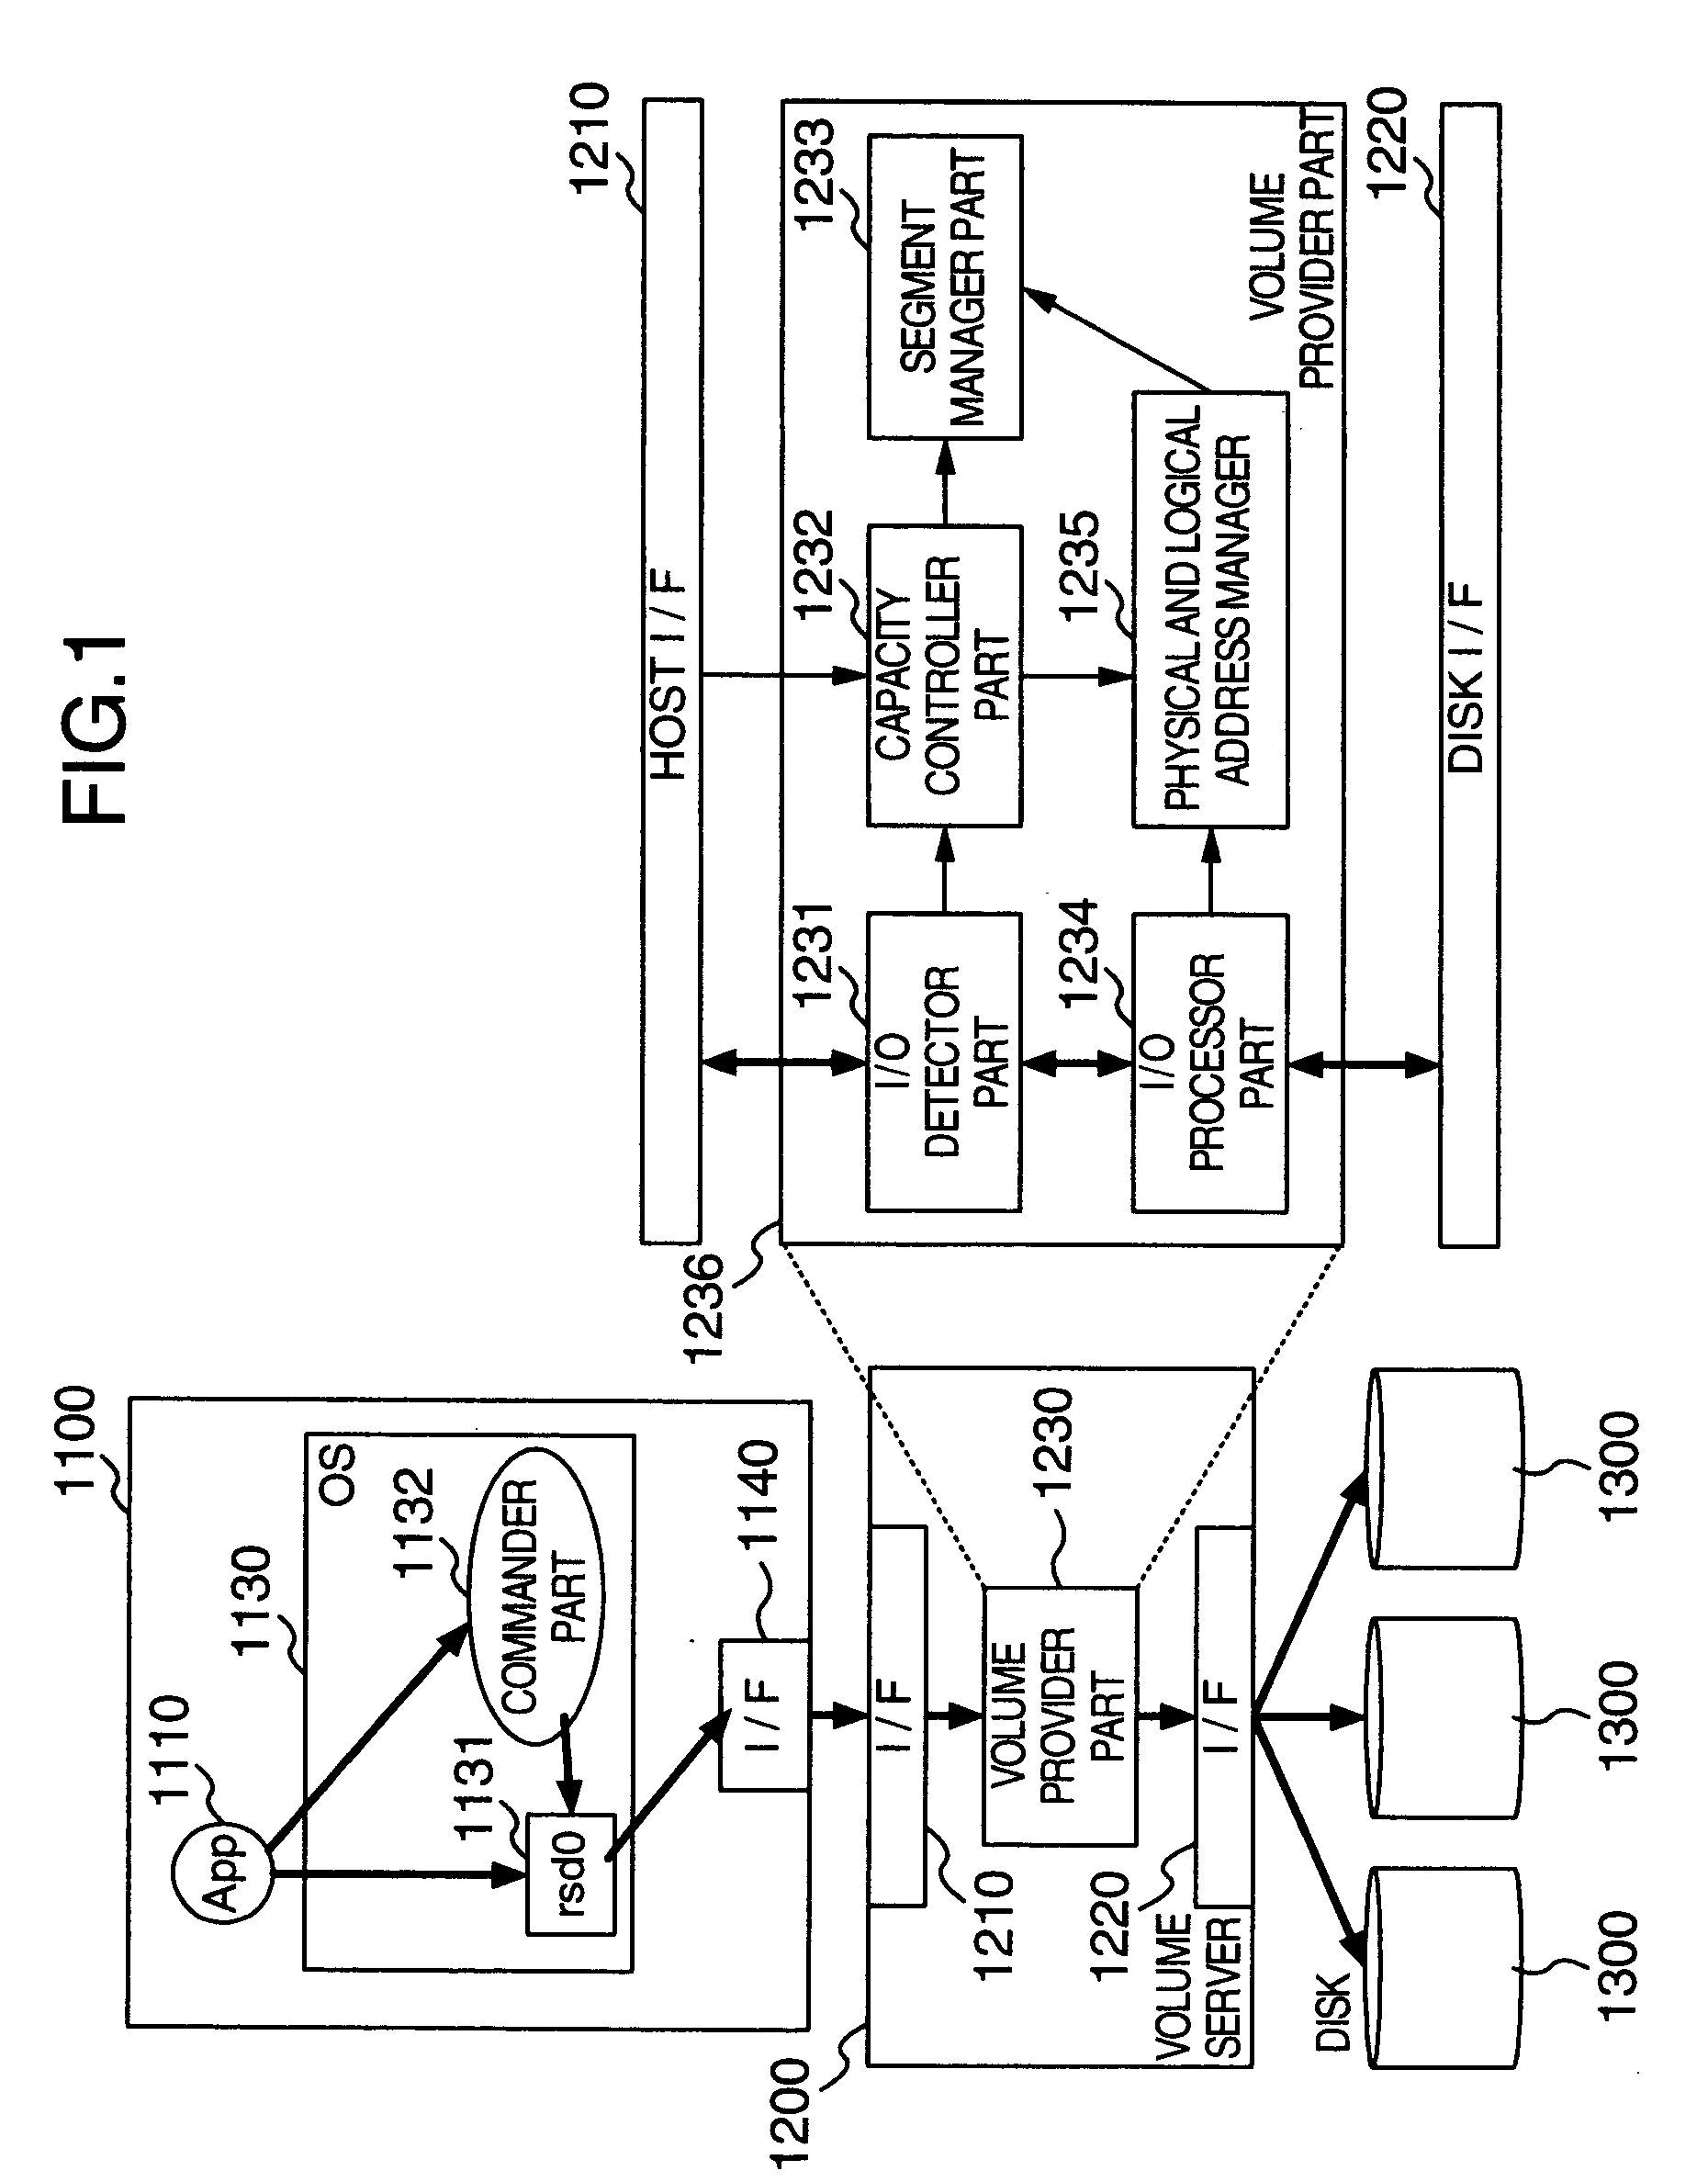 Automated on-line capacity expansion method for storage device